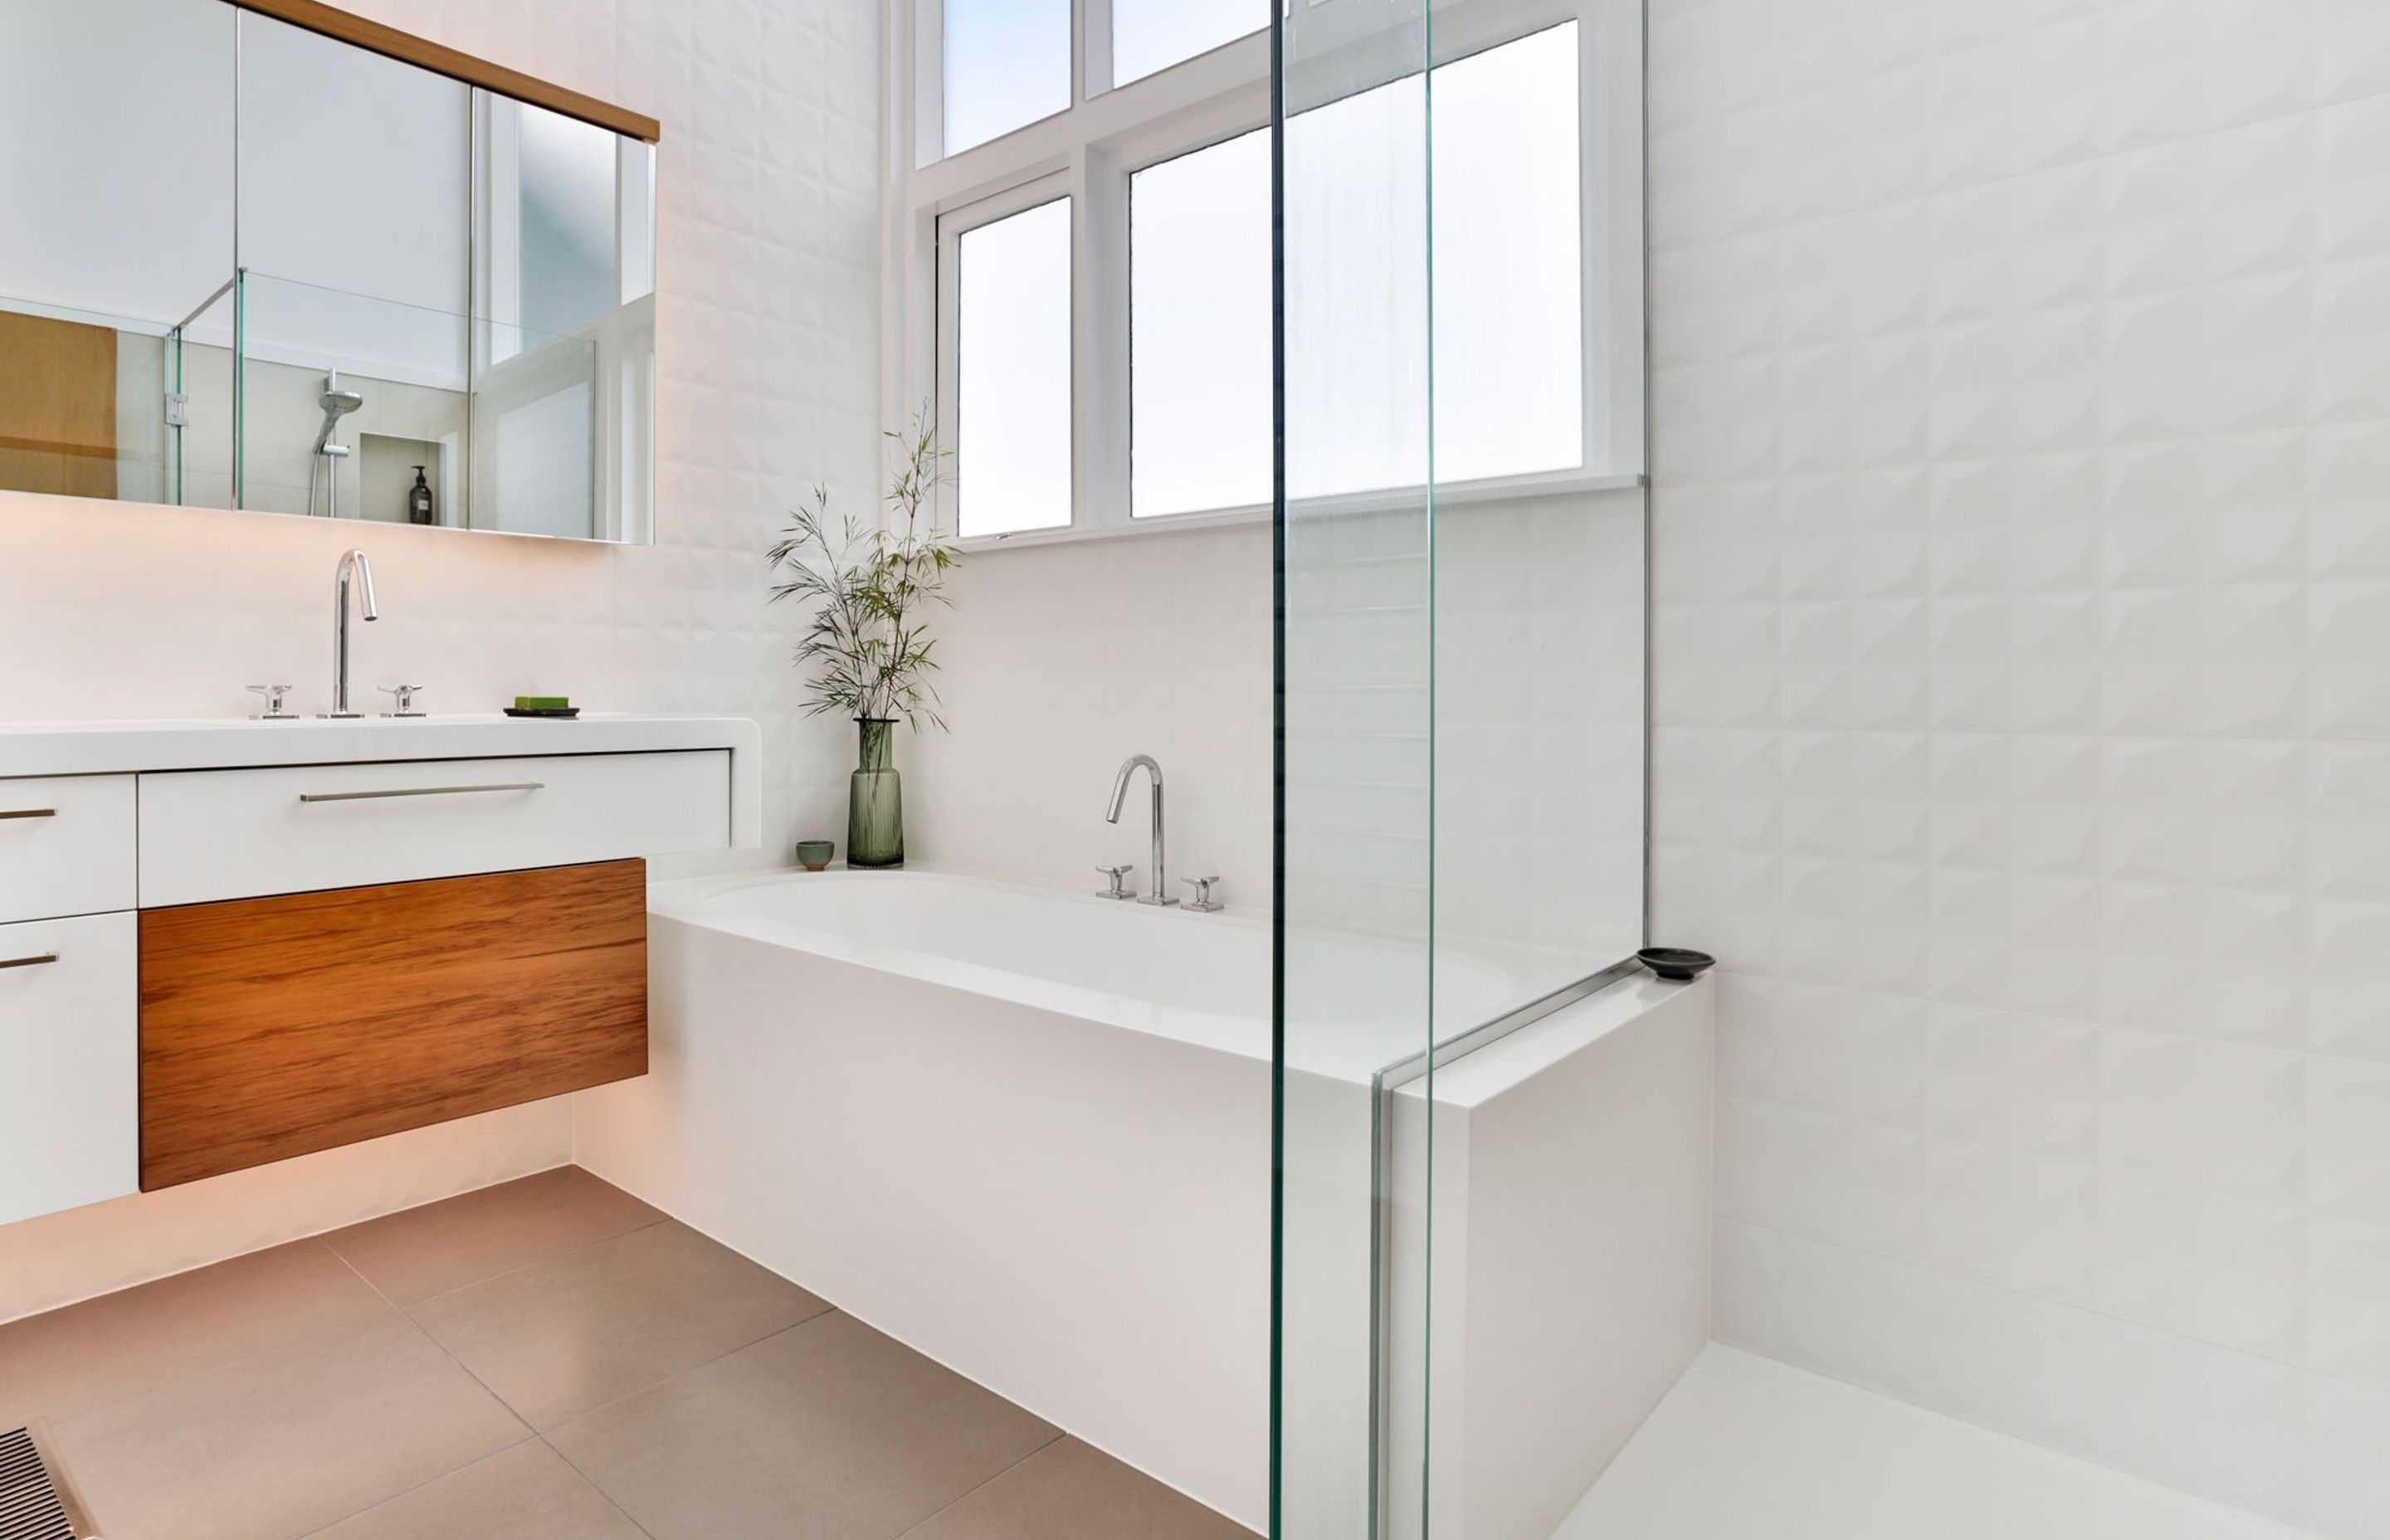 This natural light bathed bathroom delivers a sense of fresh and calm while functioning on a practical level as an easy-clean, monolithic design, seamlessly sealed in Corian.  Its geometric tiles, touches of timber and seamless forms, portray a soulful ch